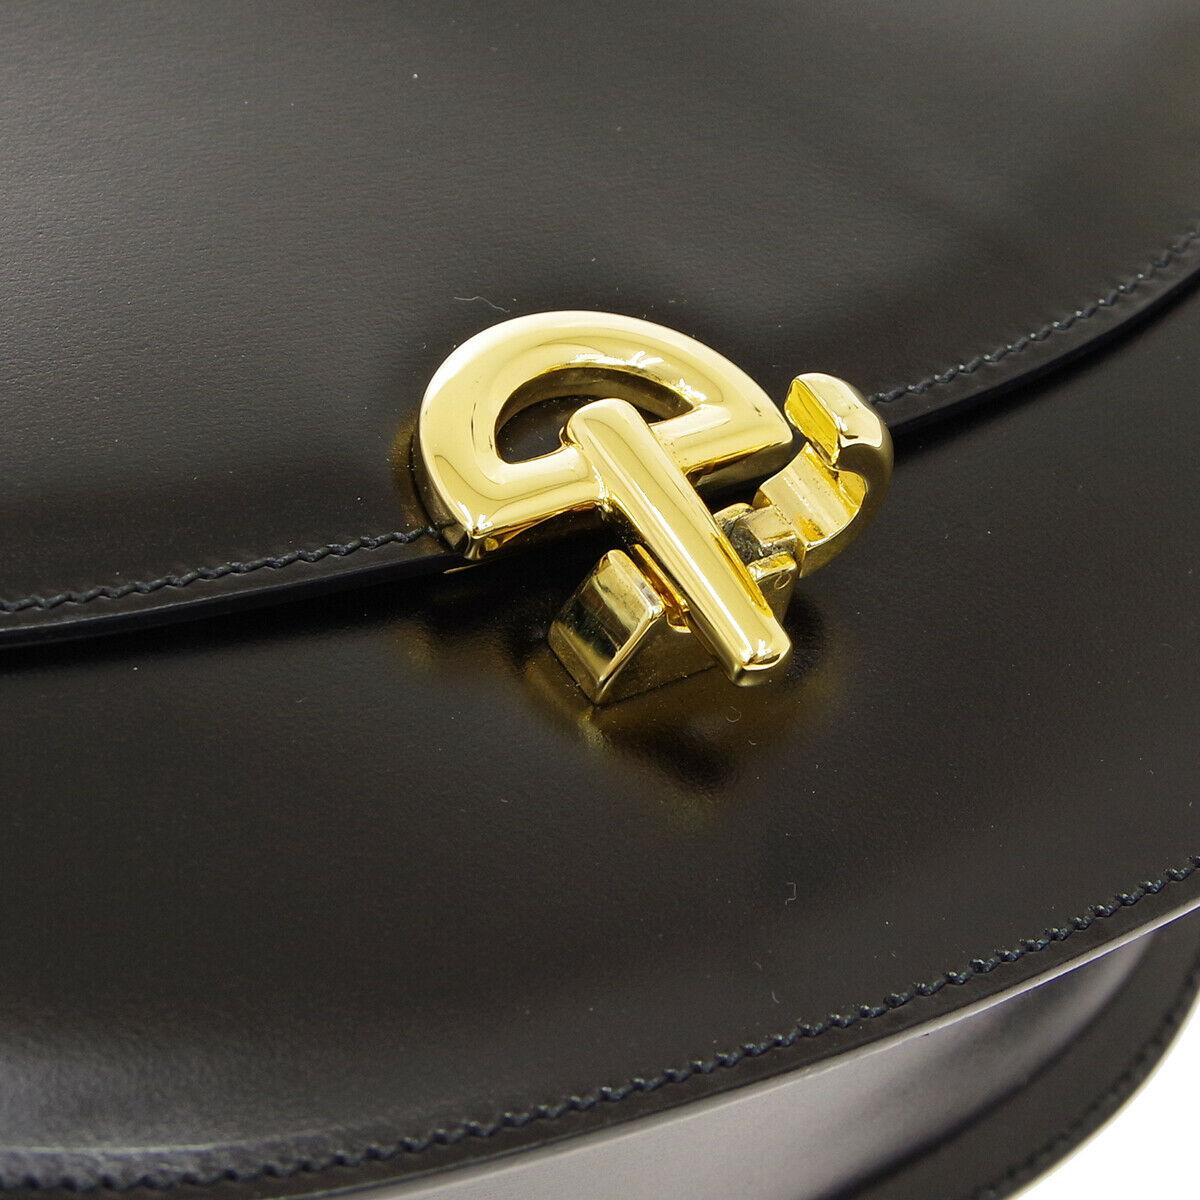 Celine Black Gold 2 in 1 Kelly Style Top Handle Satchel Flap Shoulder Bag in Box

Leather 
Gold tone hardware
Leather lining
Date code present
Made in Italy
Handle drop 4.25